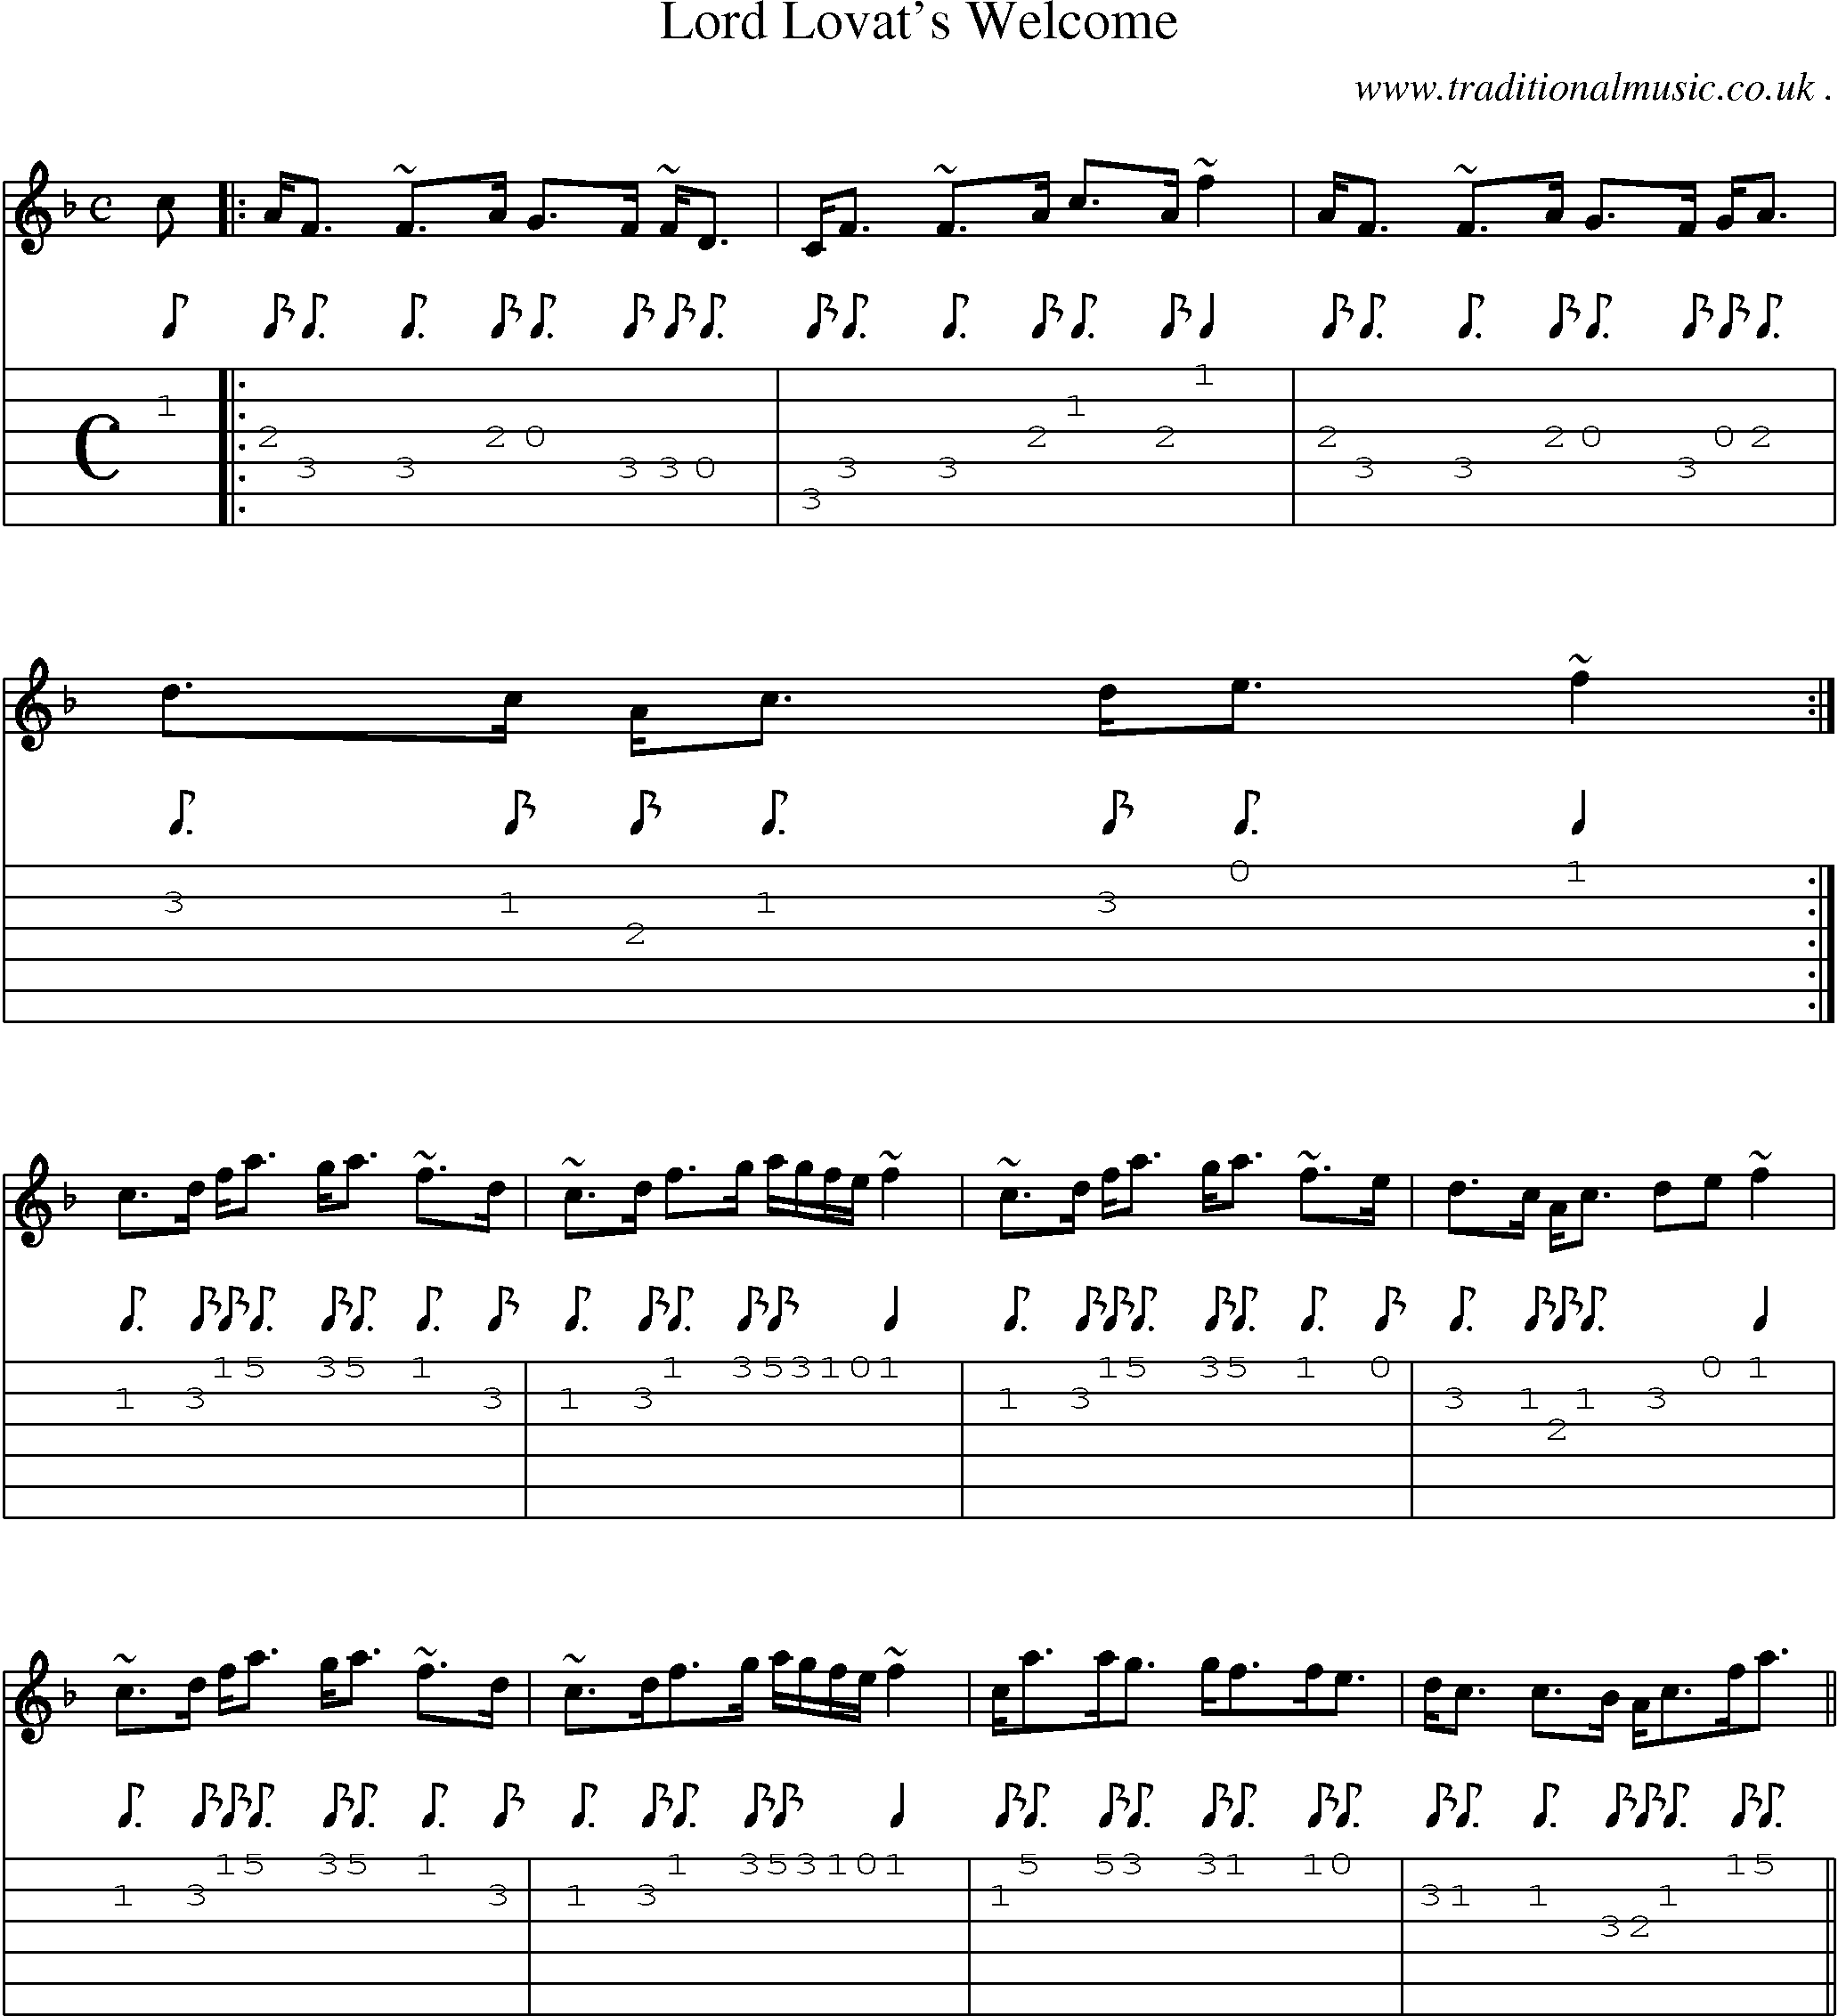 Sheet-music  score, Chords and Guitar Tabs for Lord Lovats Welcome